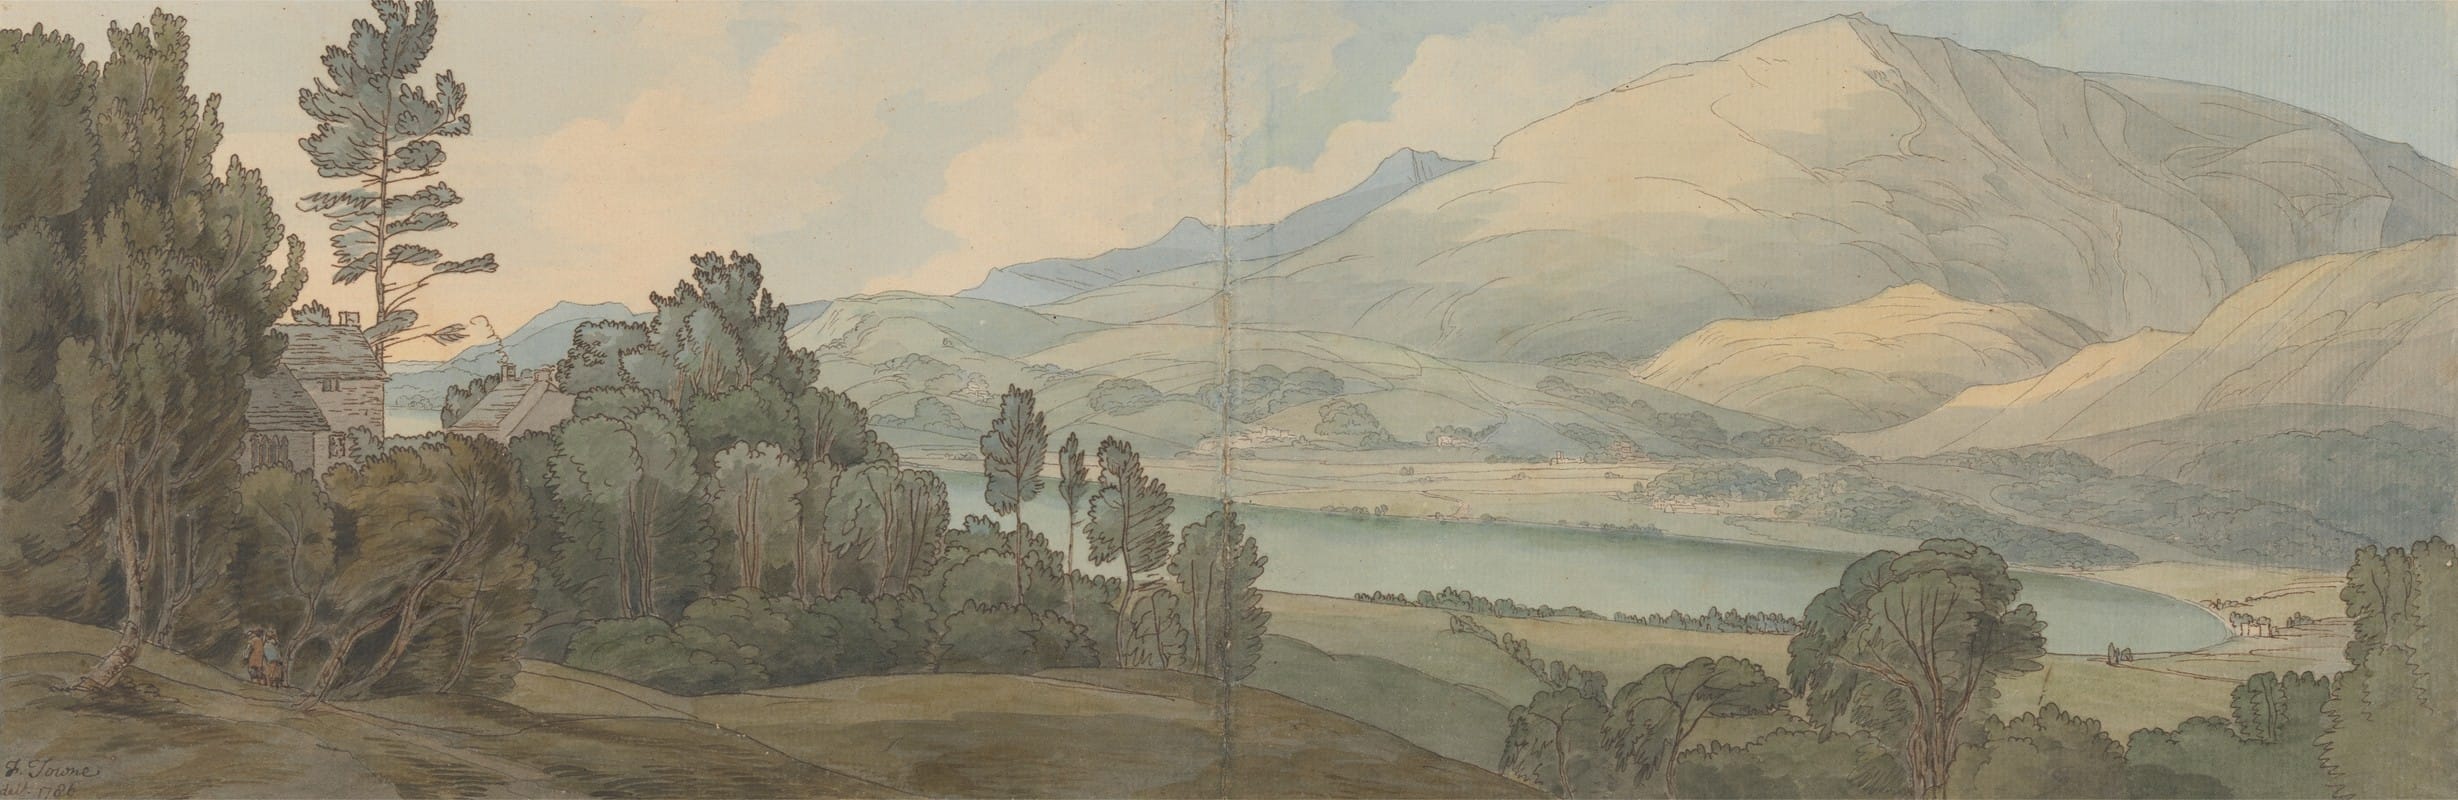 Francis Towne - View of Lake Coniston, Lancashire